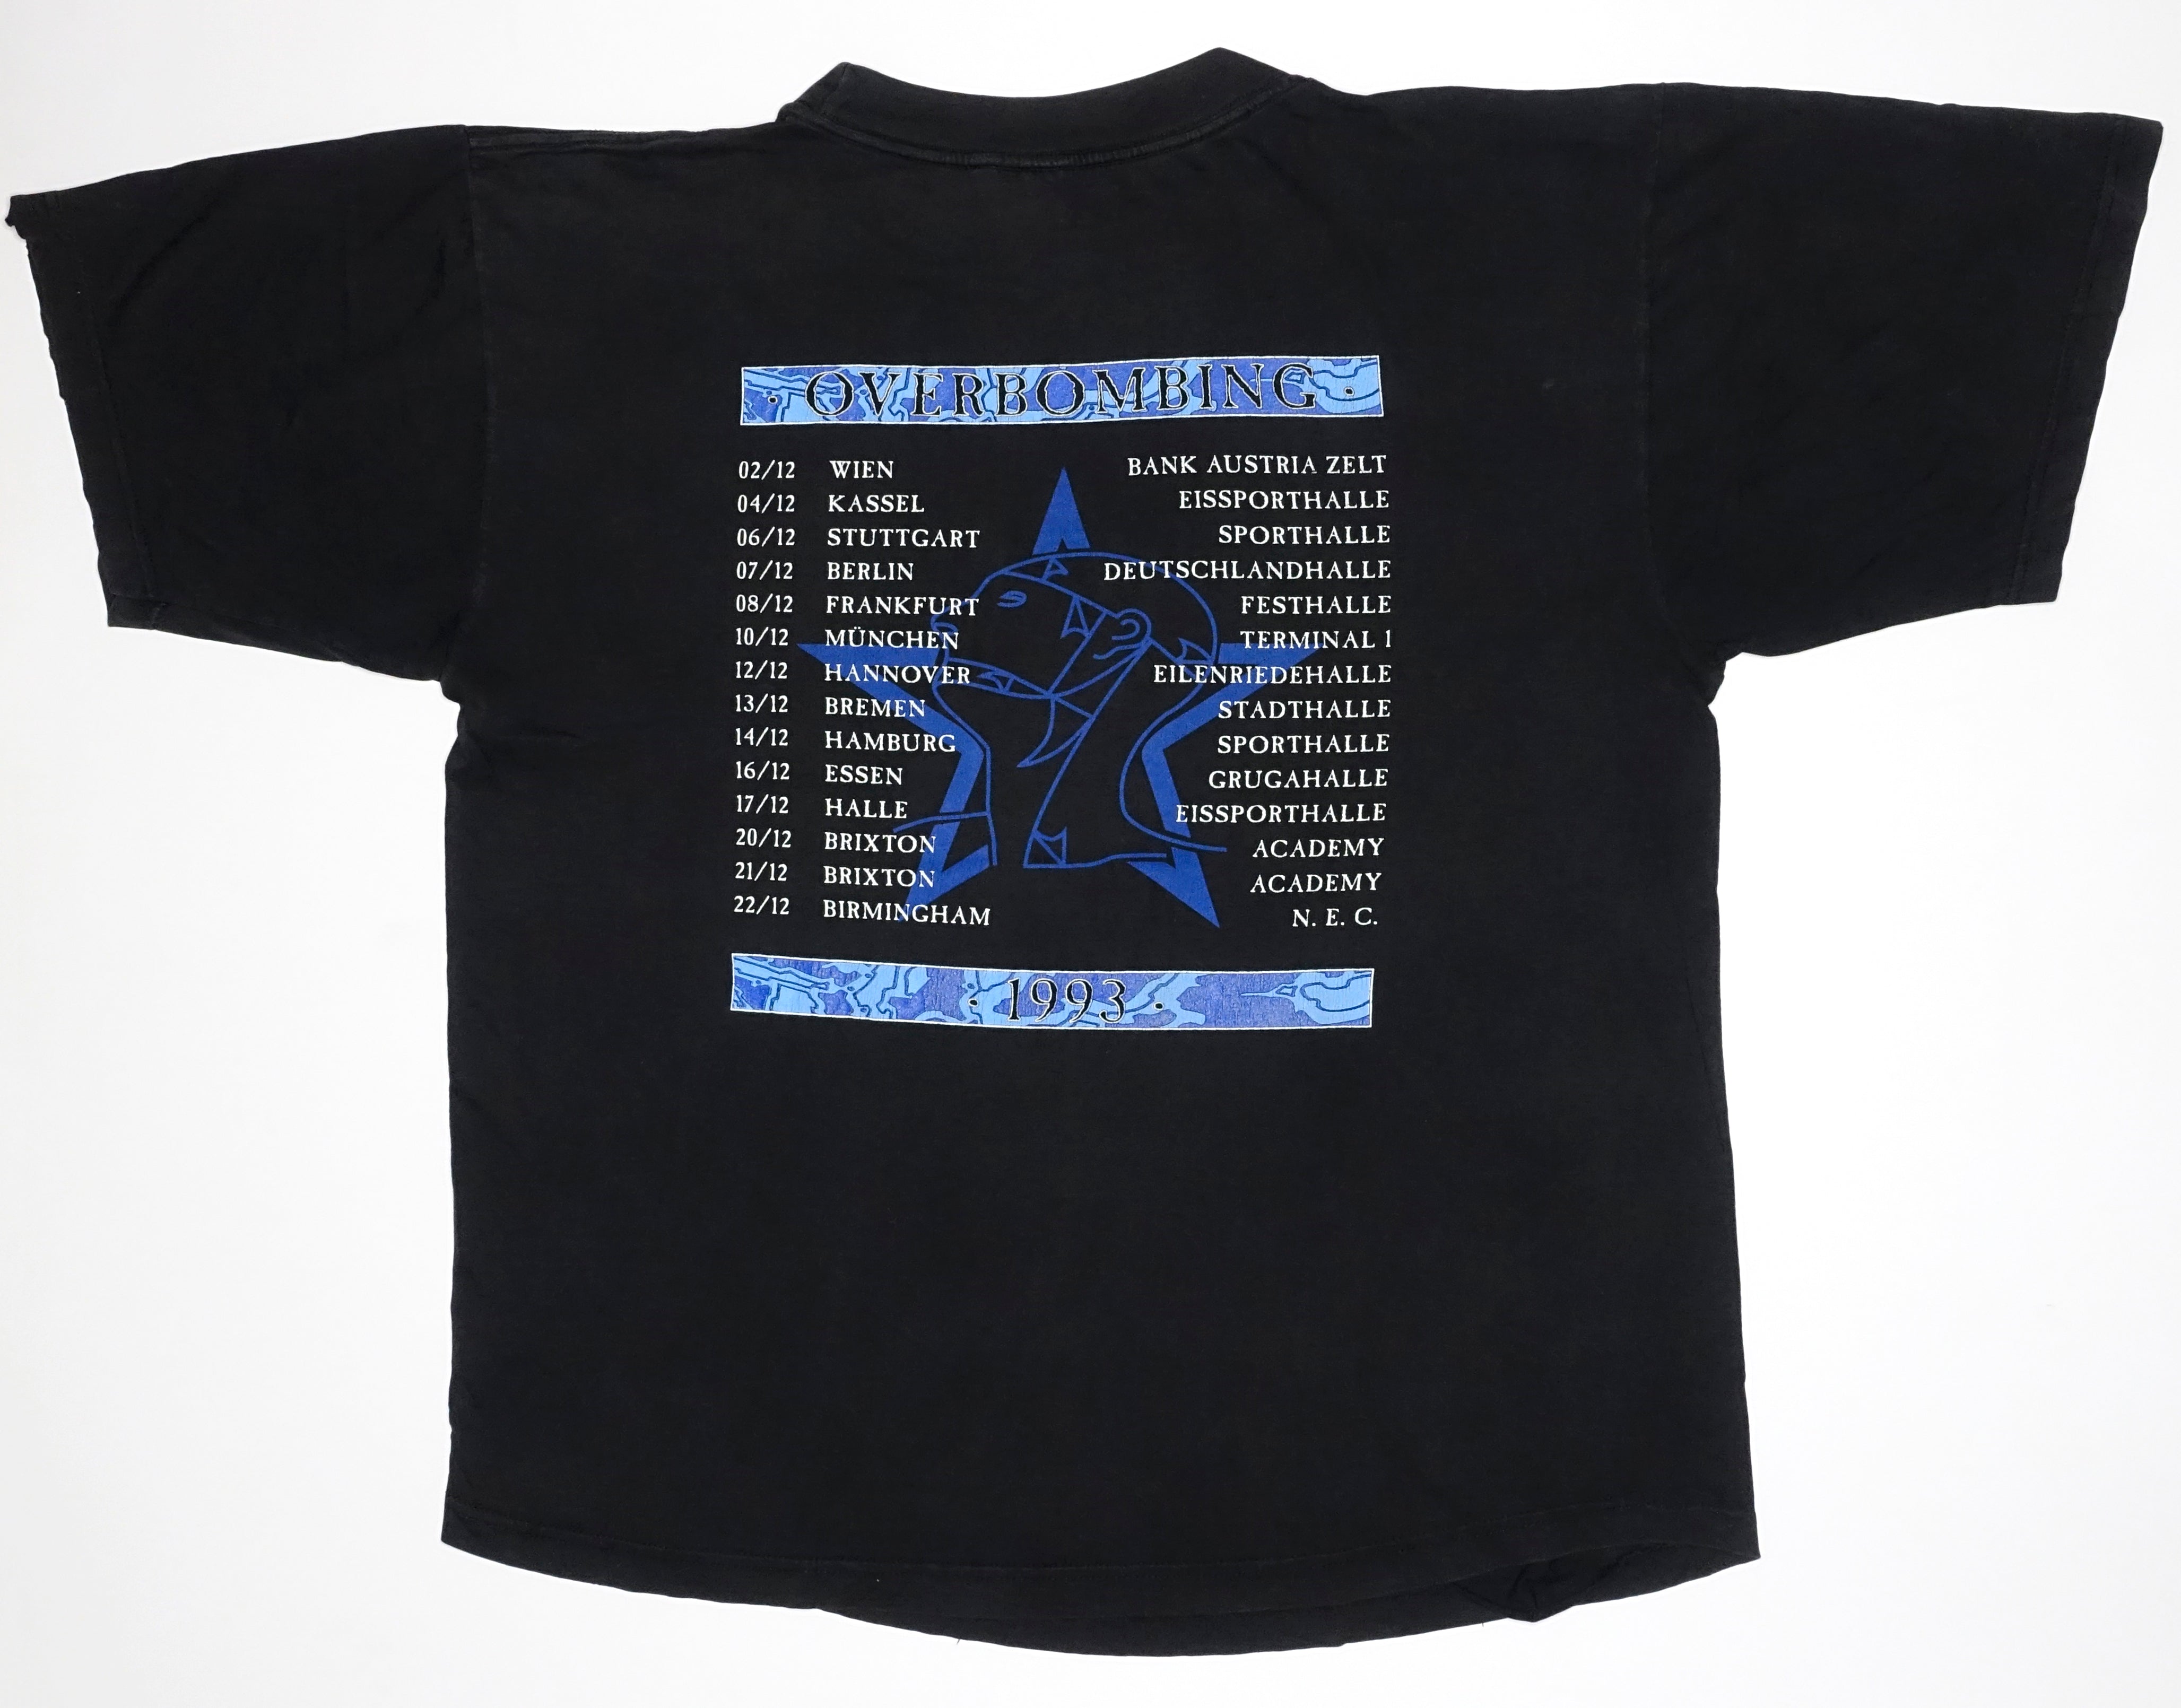 Sister Of Mercy - Overbombing 1993 EU Tour Shirt Size XL